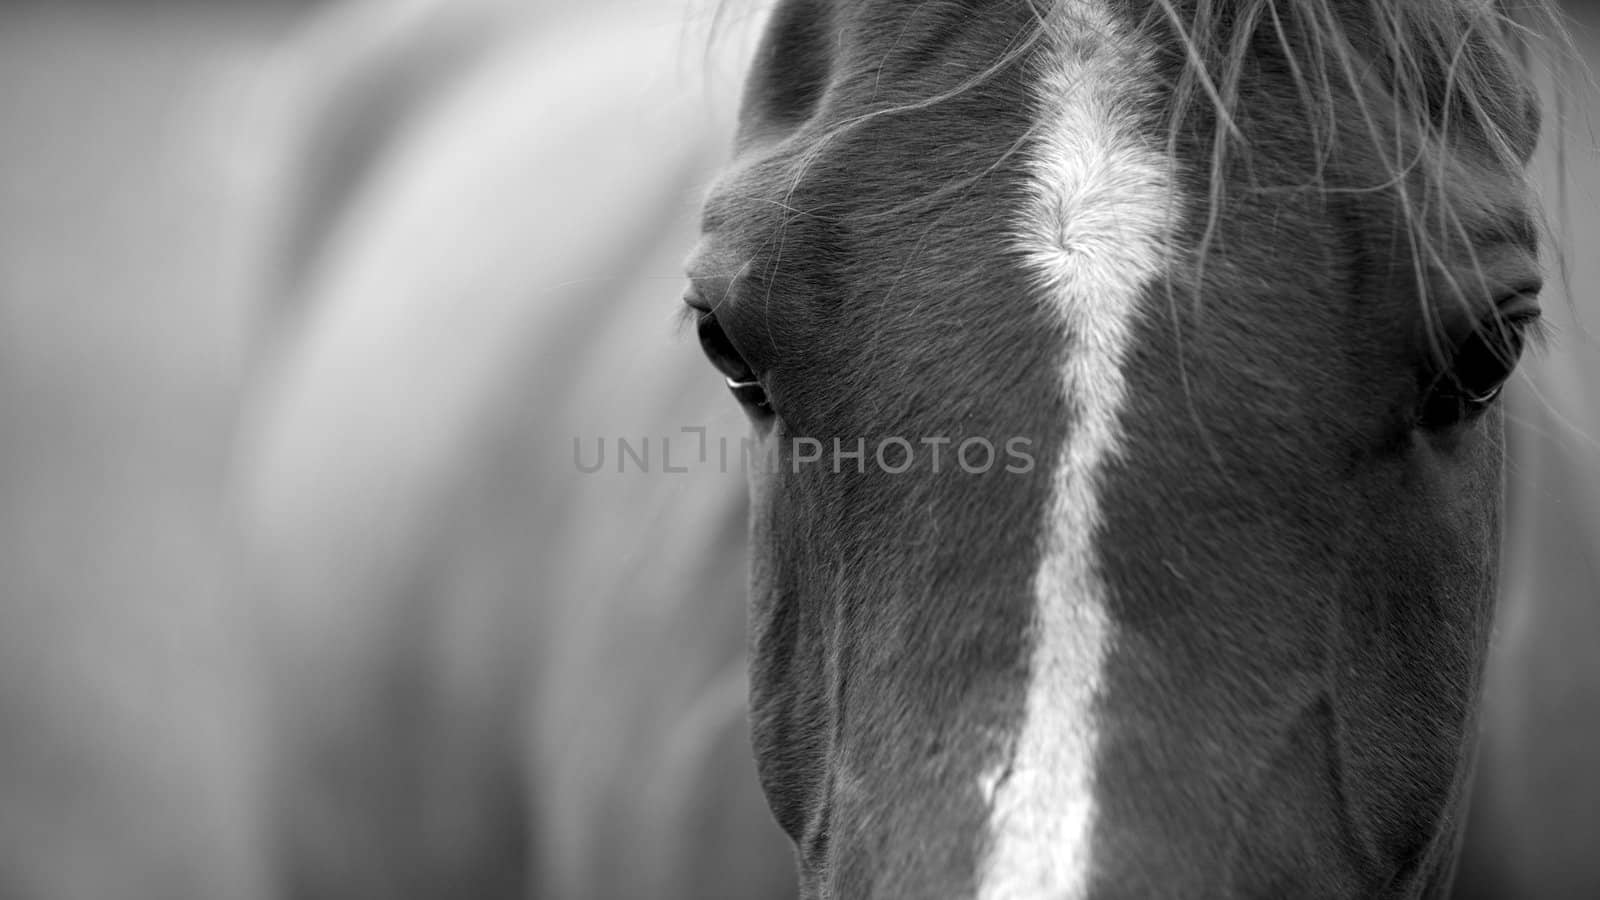 Black and white horse, close up photograph